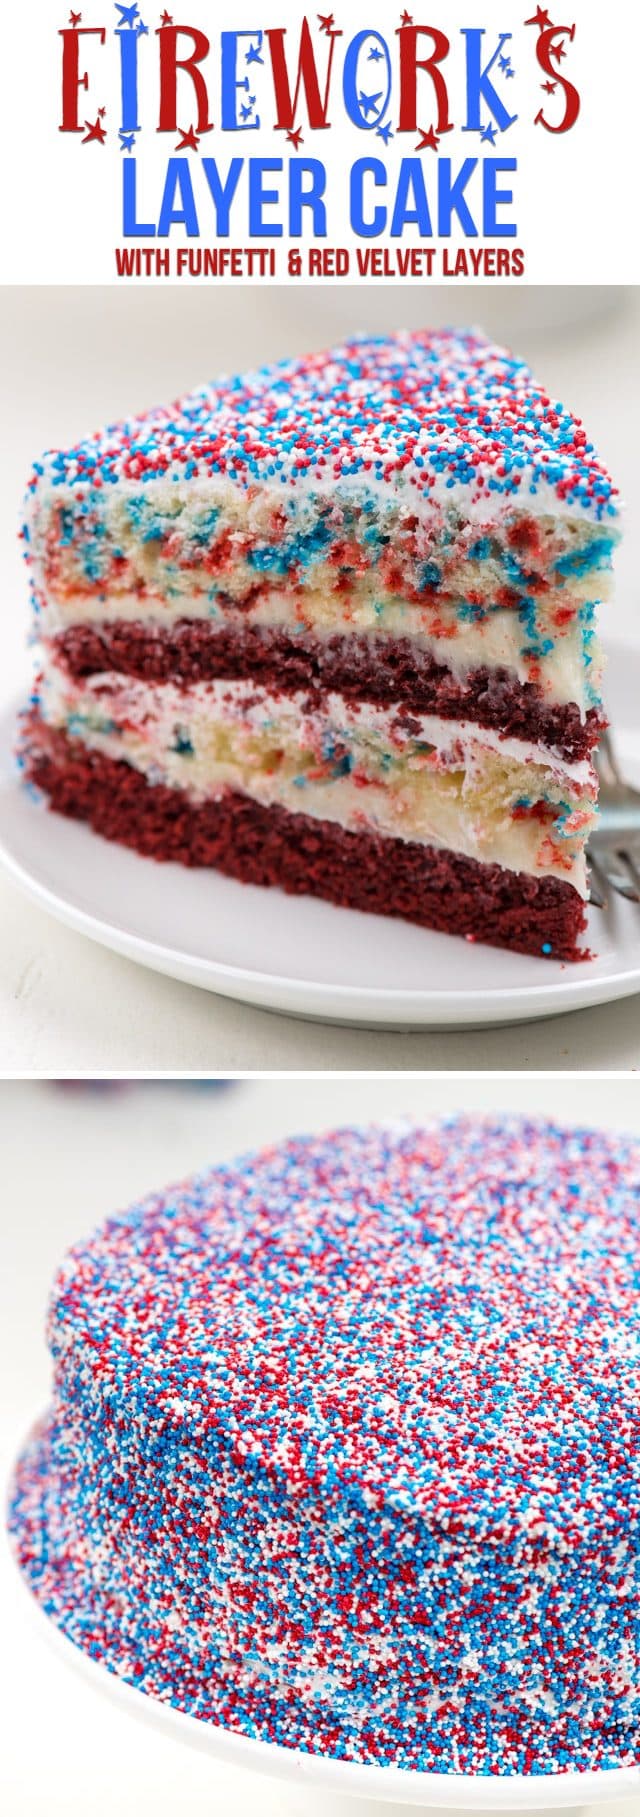 collage of fireworks cake photos